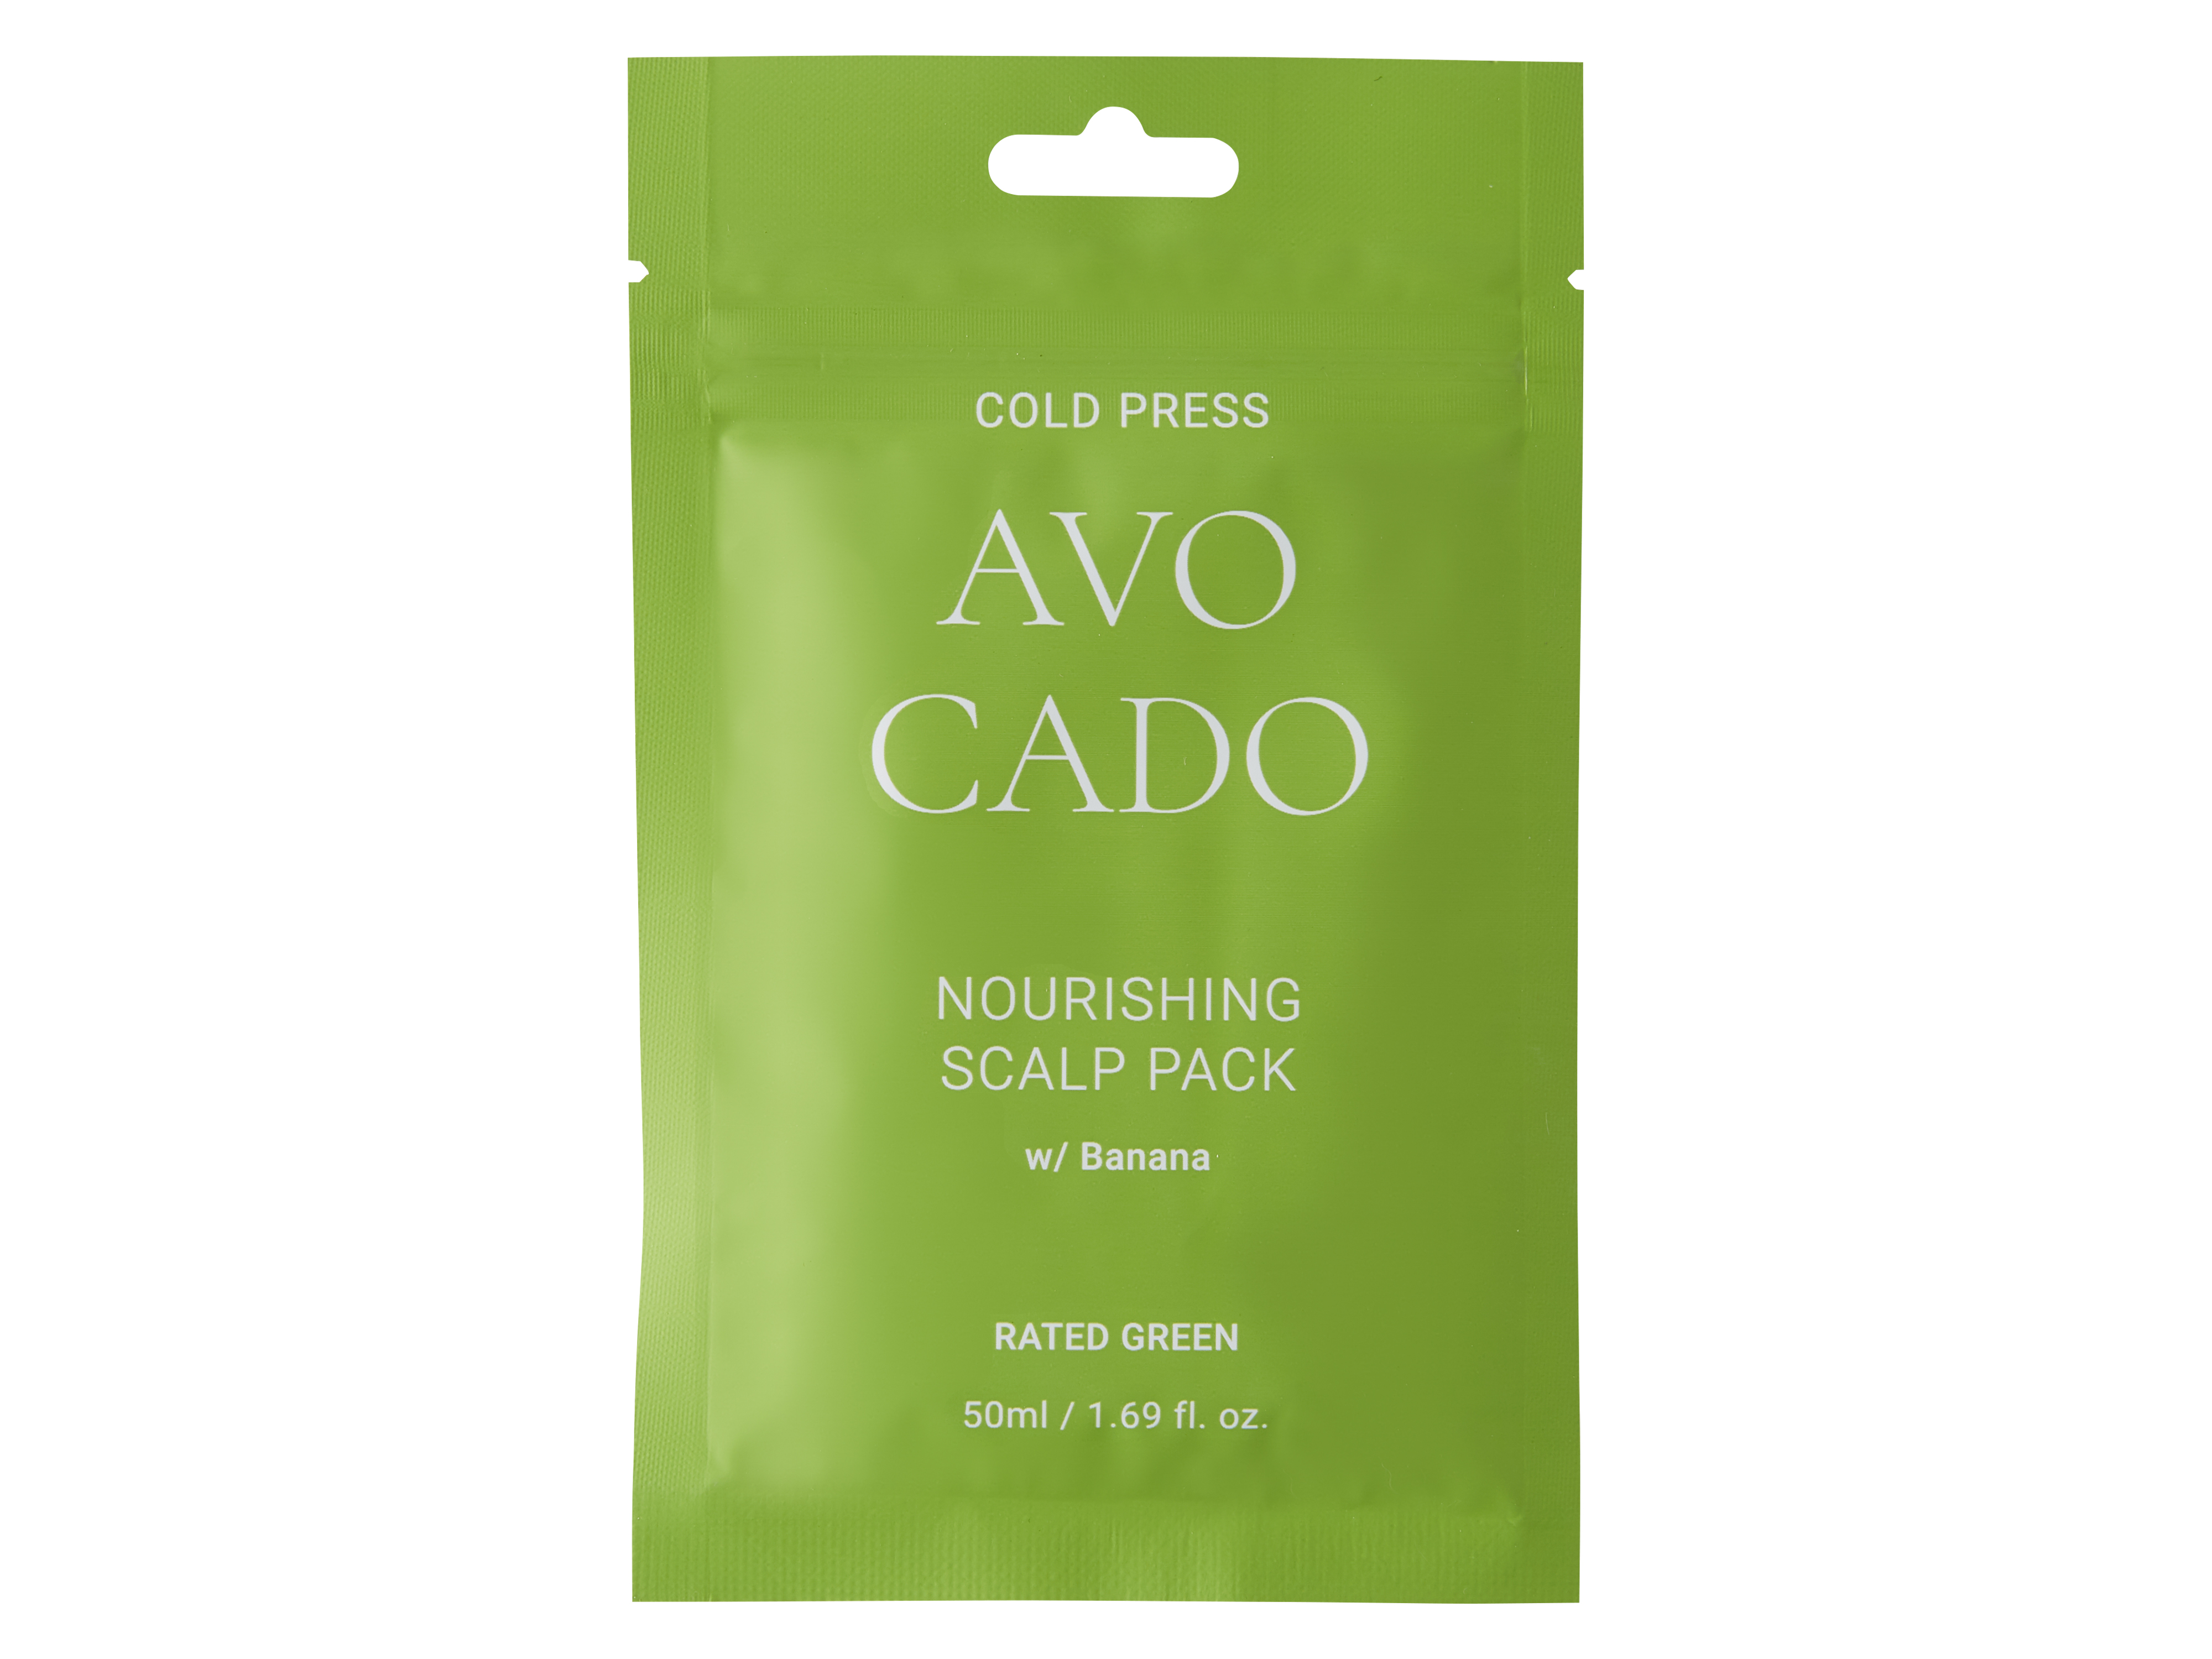 Rated Green Cold Press Avocado Nourishing Scalp Pack, 50 ml